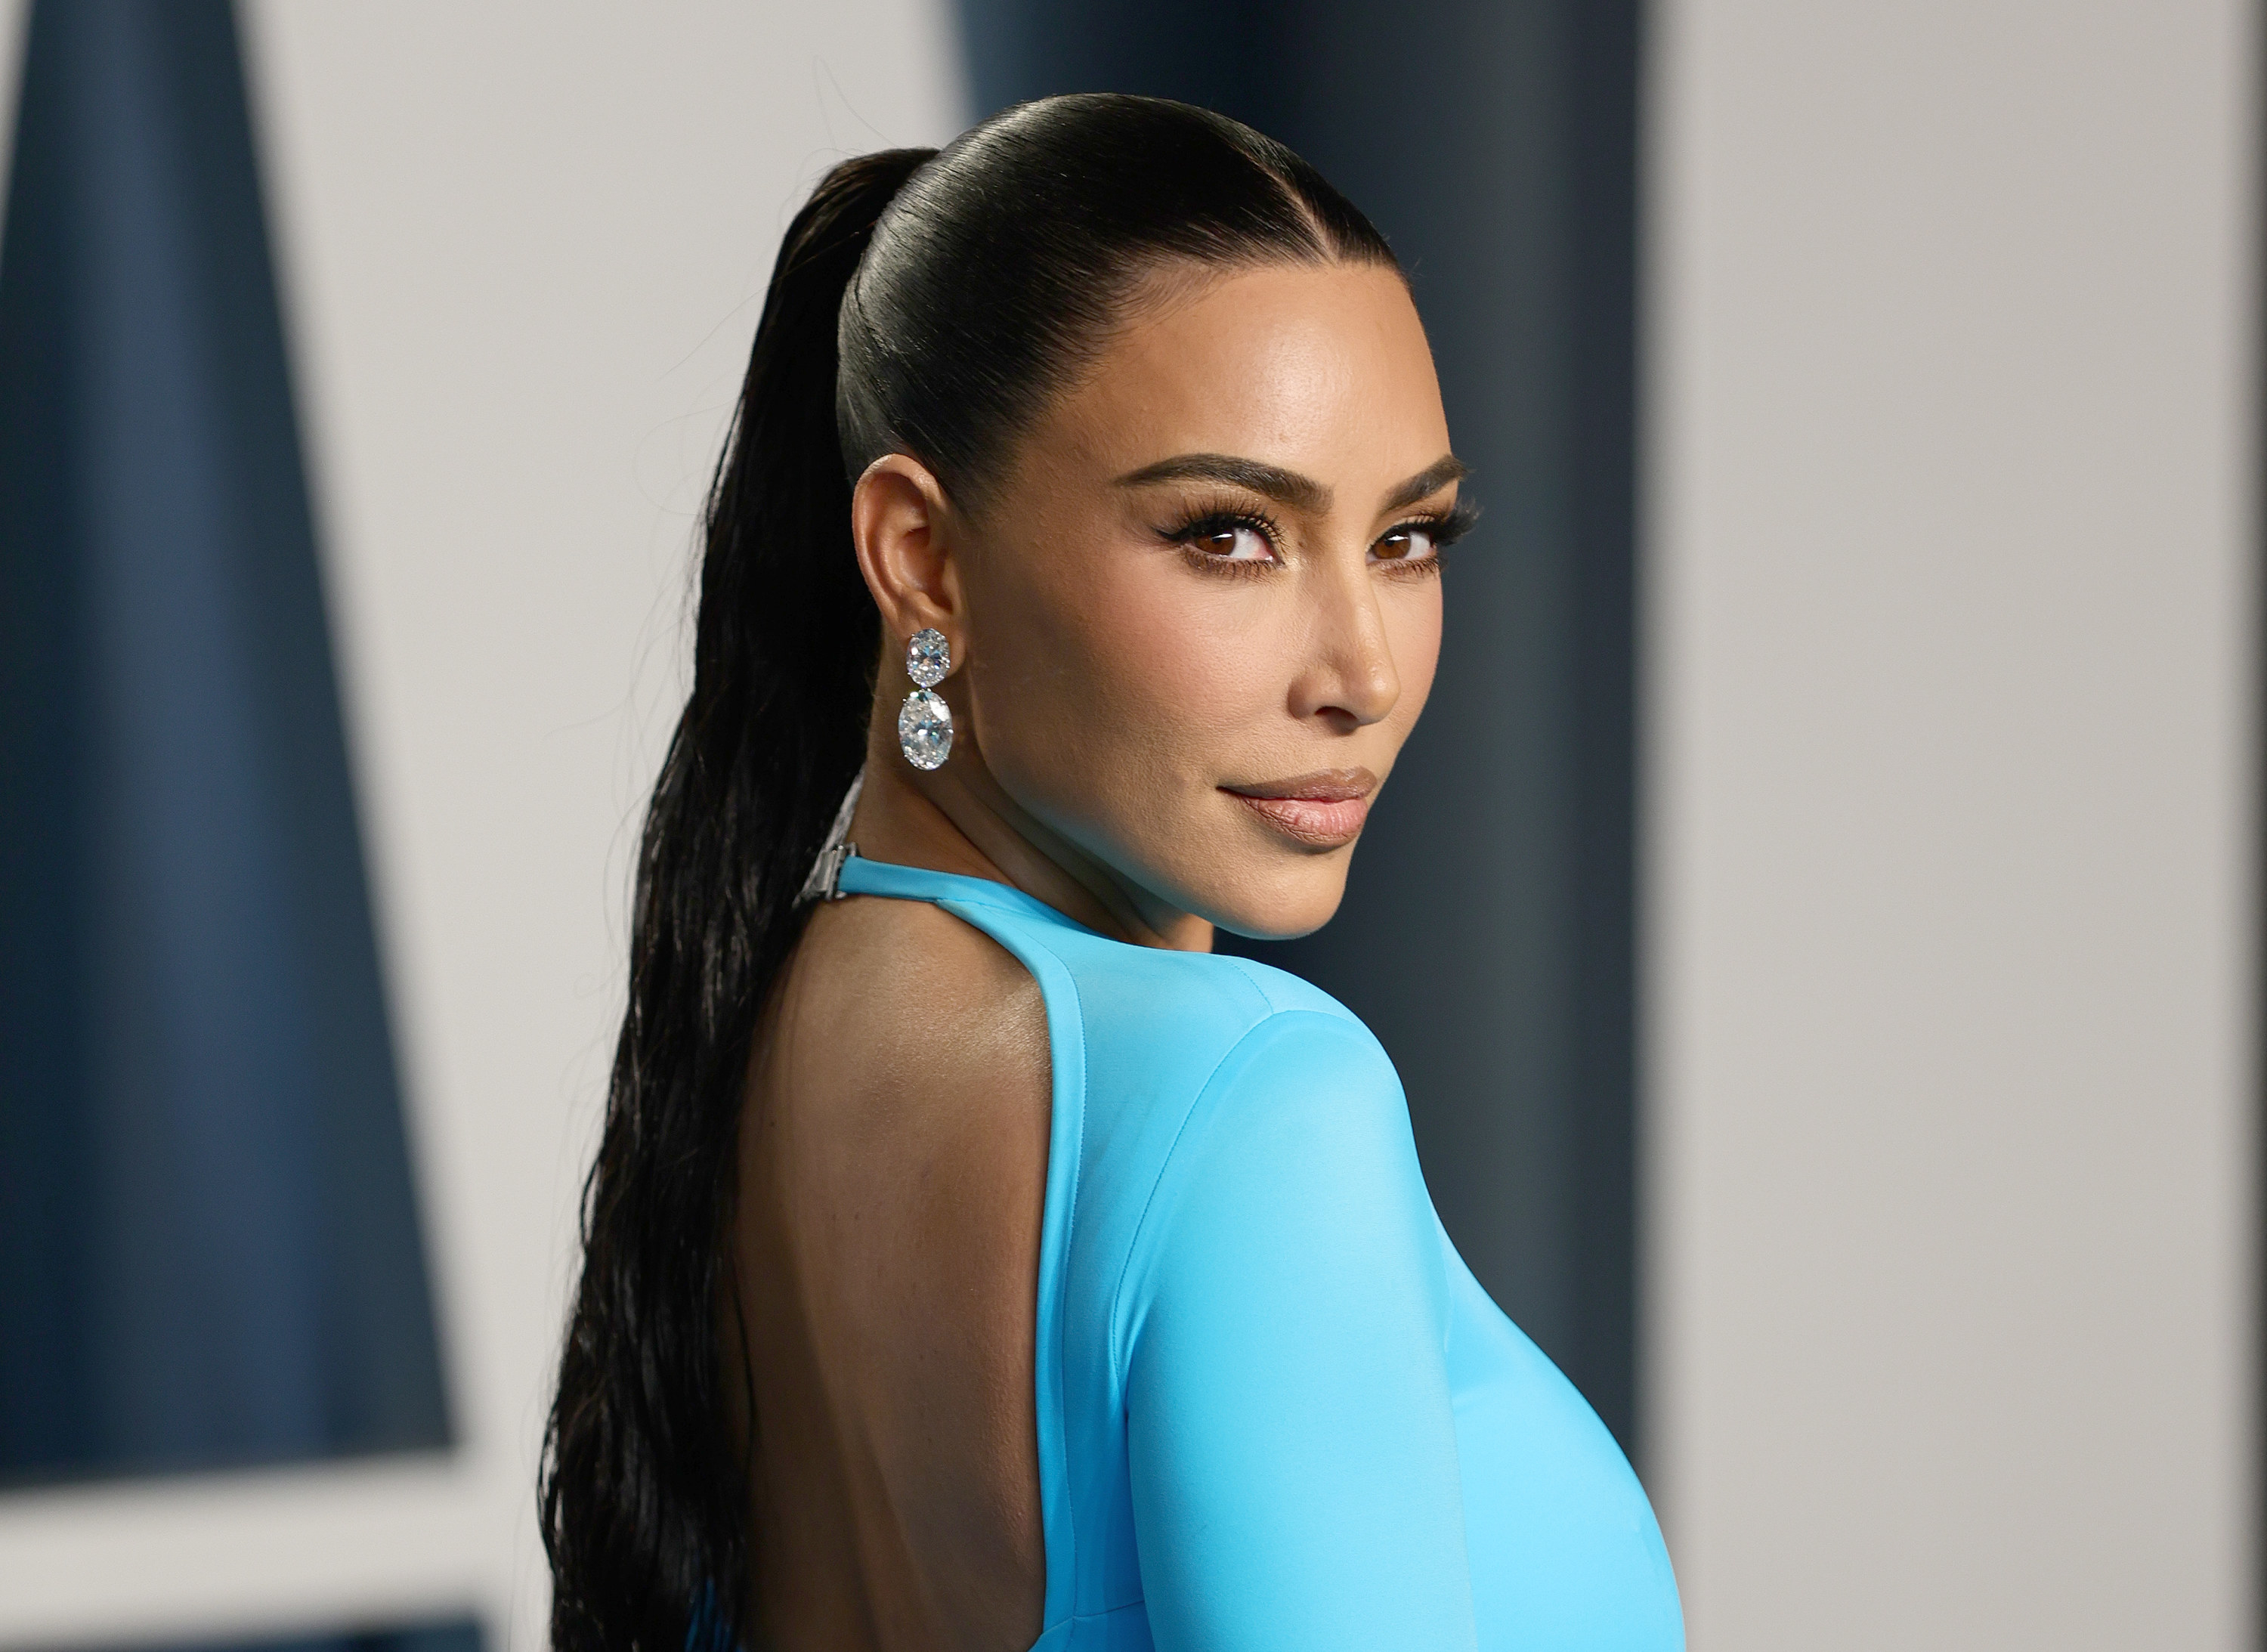 Kim Kardashian attends the 2022 Vanity Fair Oscar Party in Beverly Hills, California, on March 27, 2022.